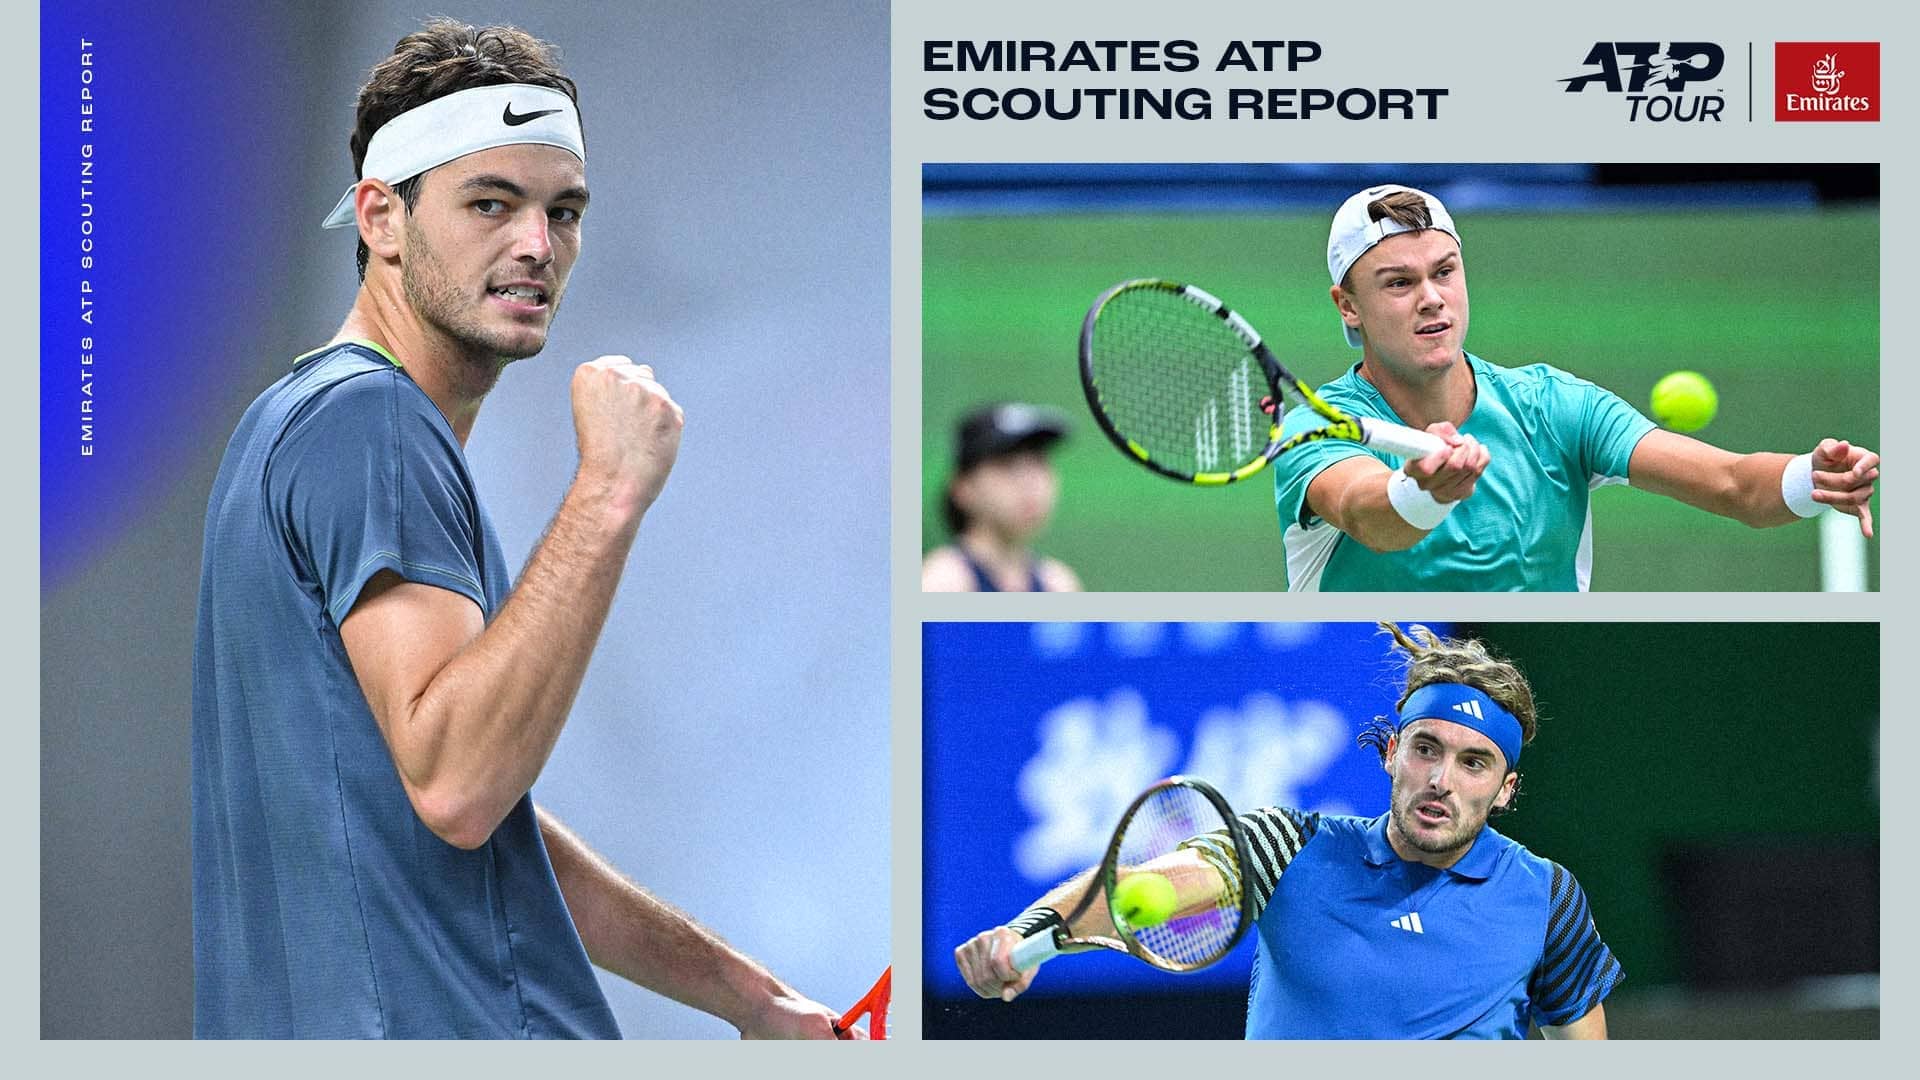 Taylor Fritz, Holger Rune and Stefanos Tsitsipas are in action this week.